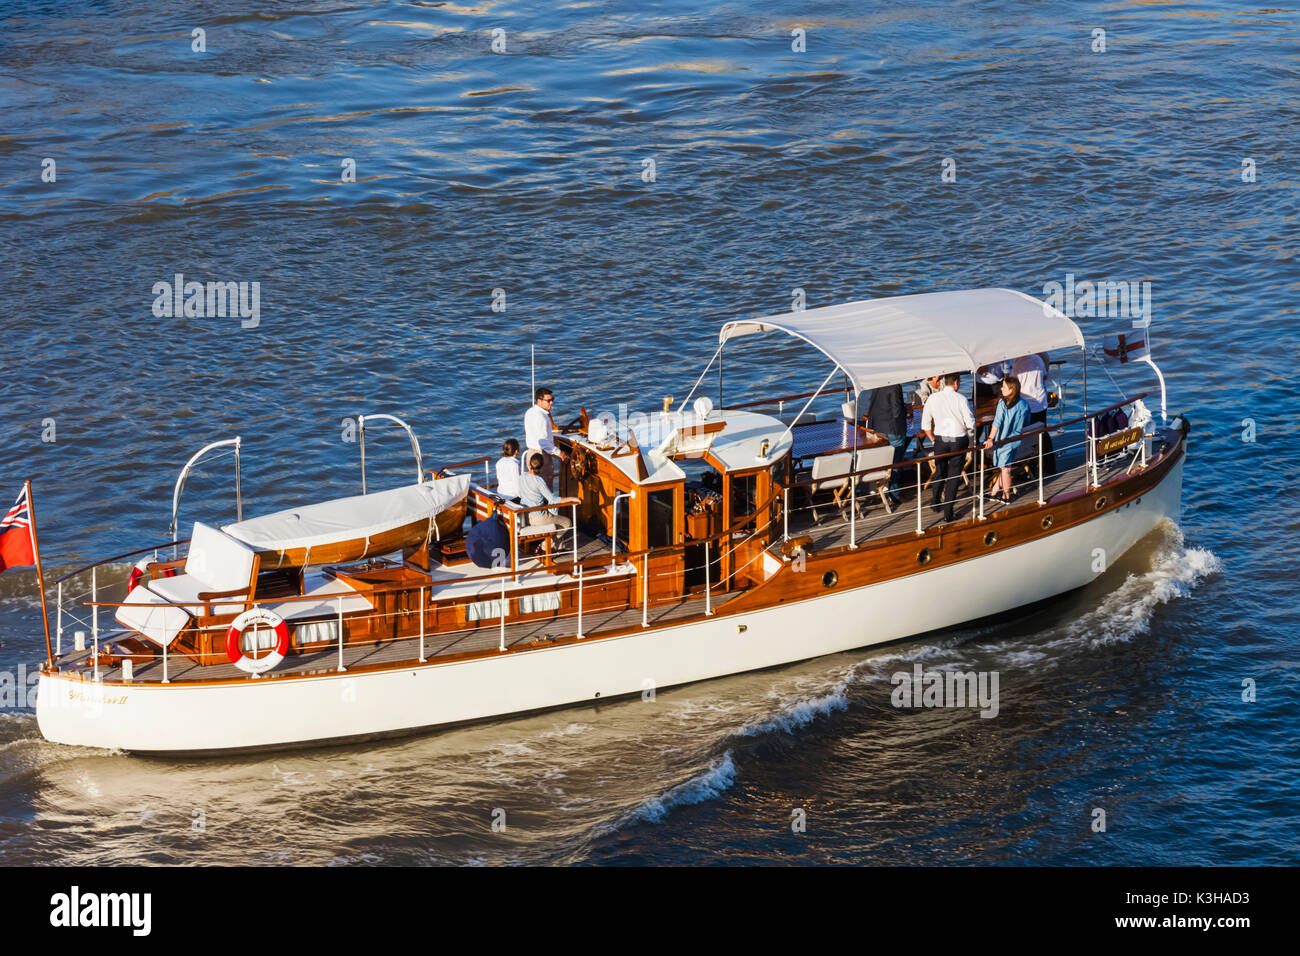 England, London, Small Luxury Motorboat on River Thames Stock Photo